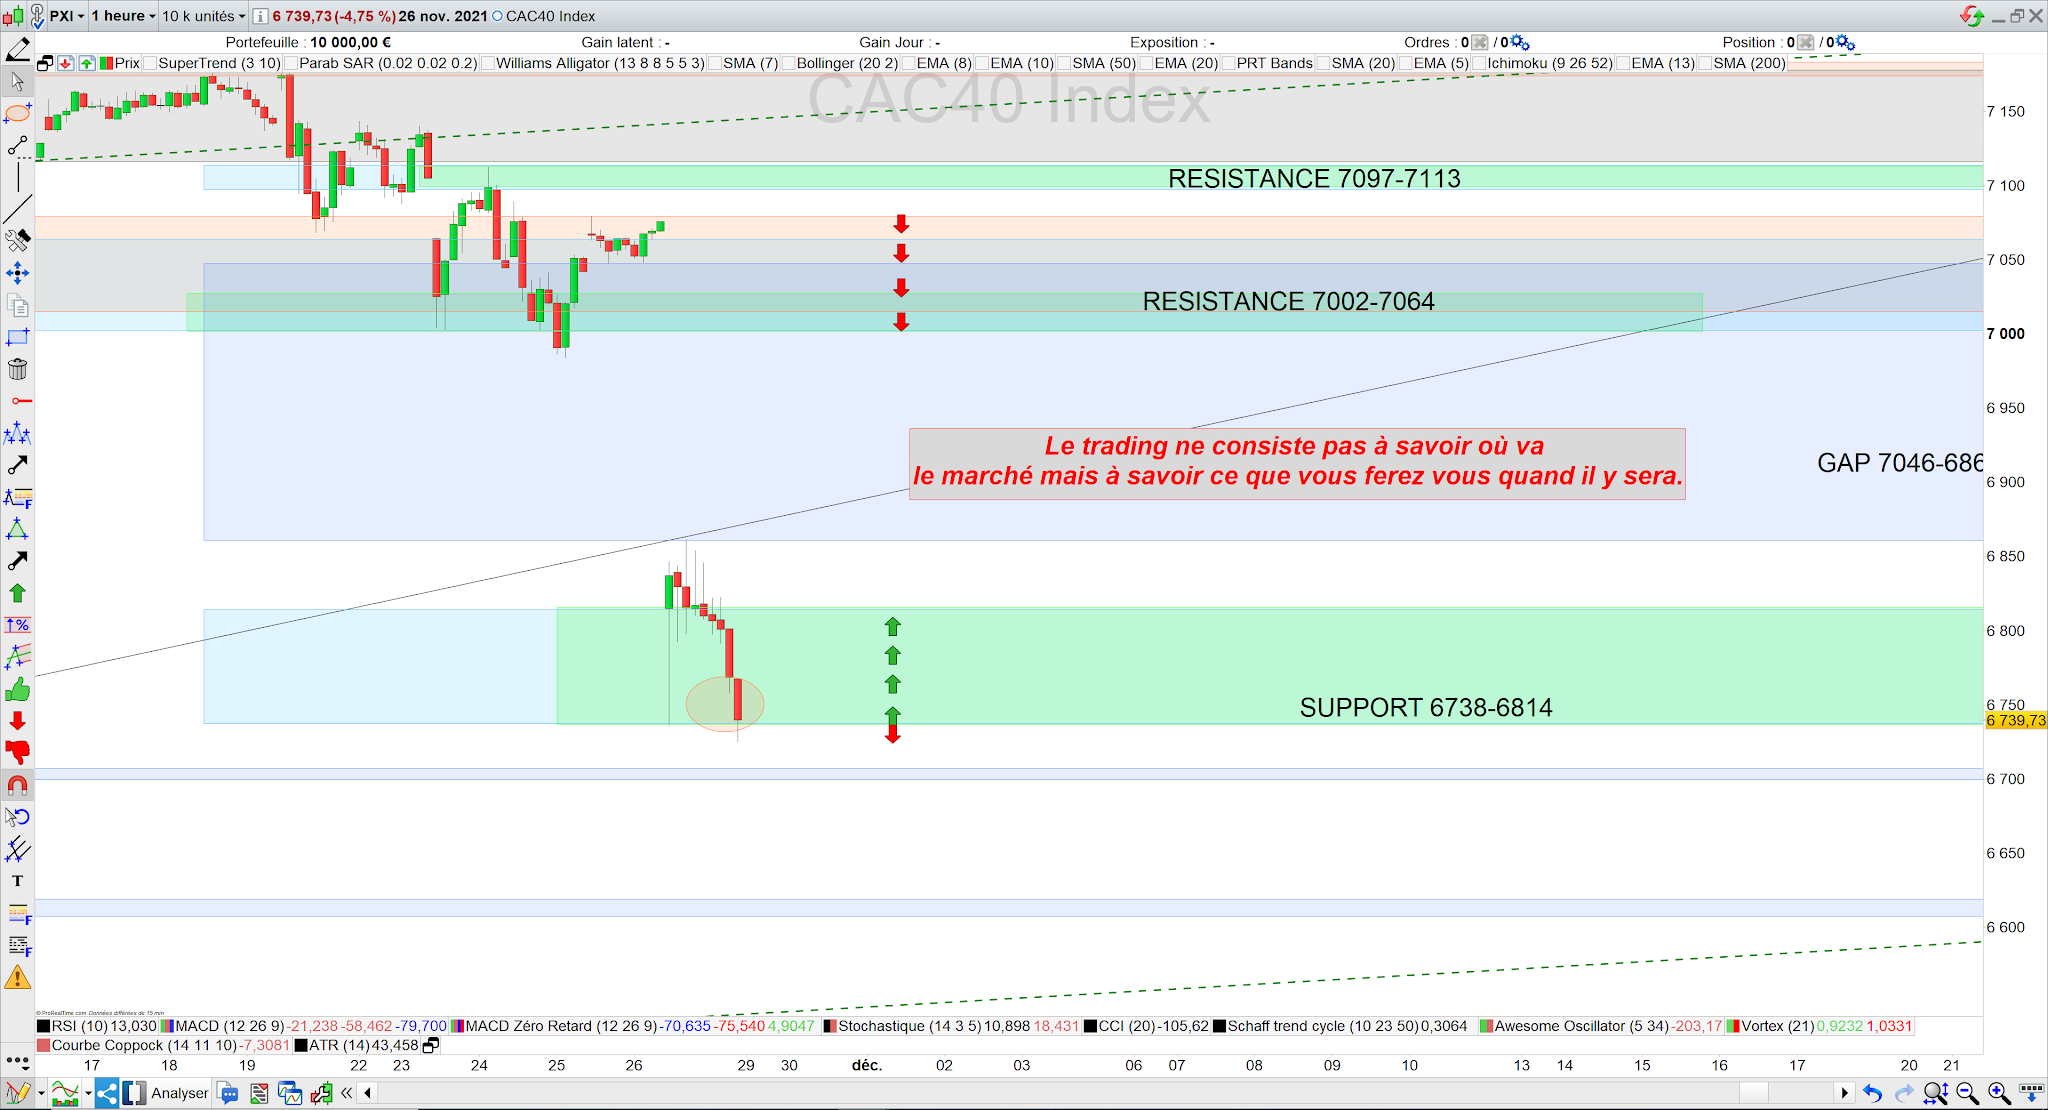 Trading cac40 29/11/21